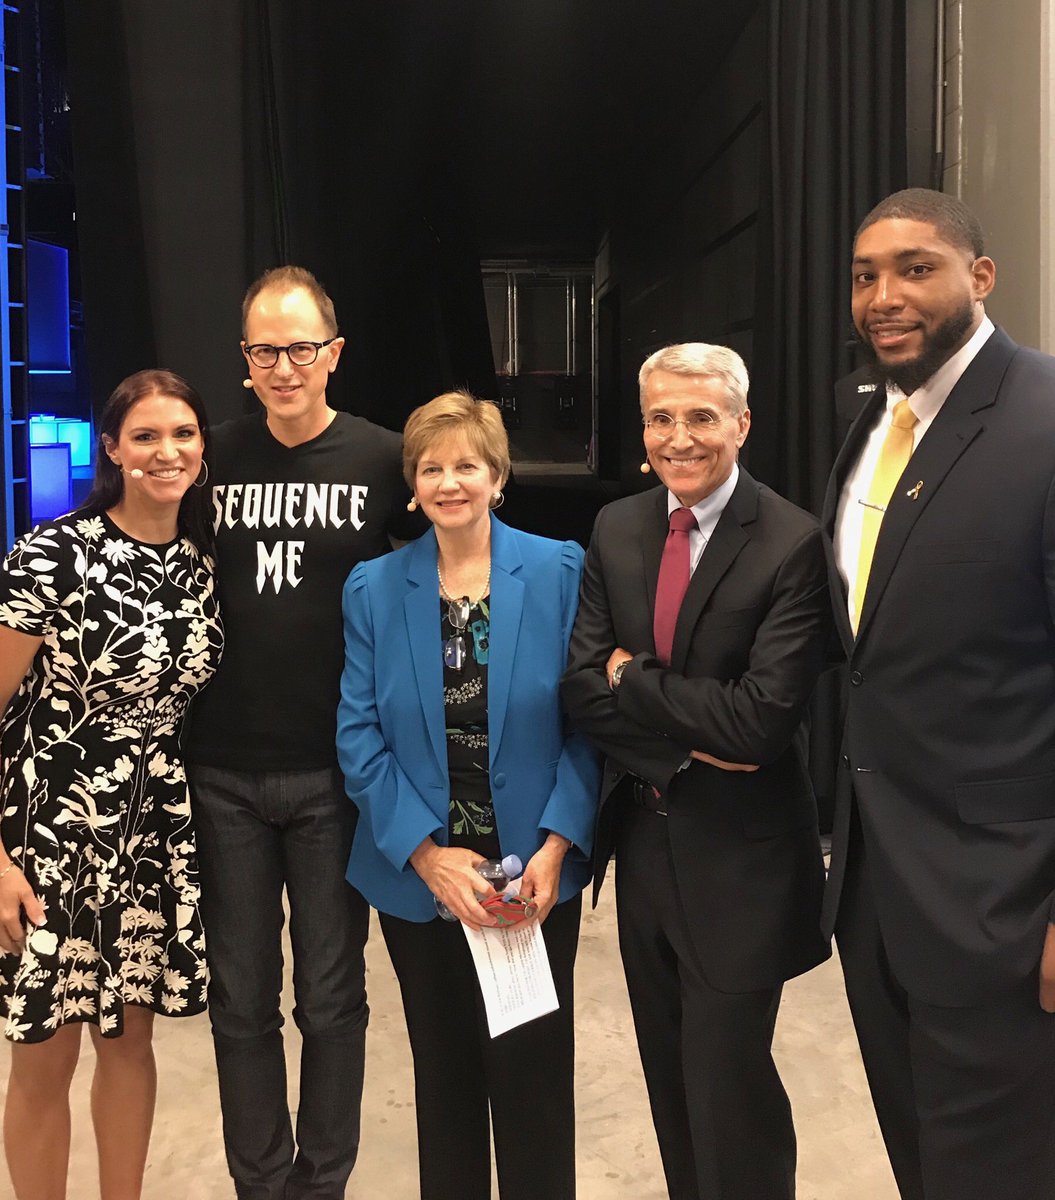 It was an honor to be a part of the #BidenCancerSummit today speaking alongside @Dev_Still71, @realrickpazdur & @bryceolson. Today is about opportunity, to bring all sectors together to improve treatments and create cures, especially for our children.